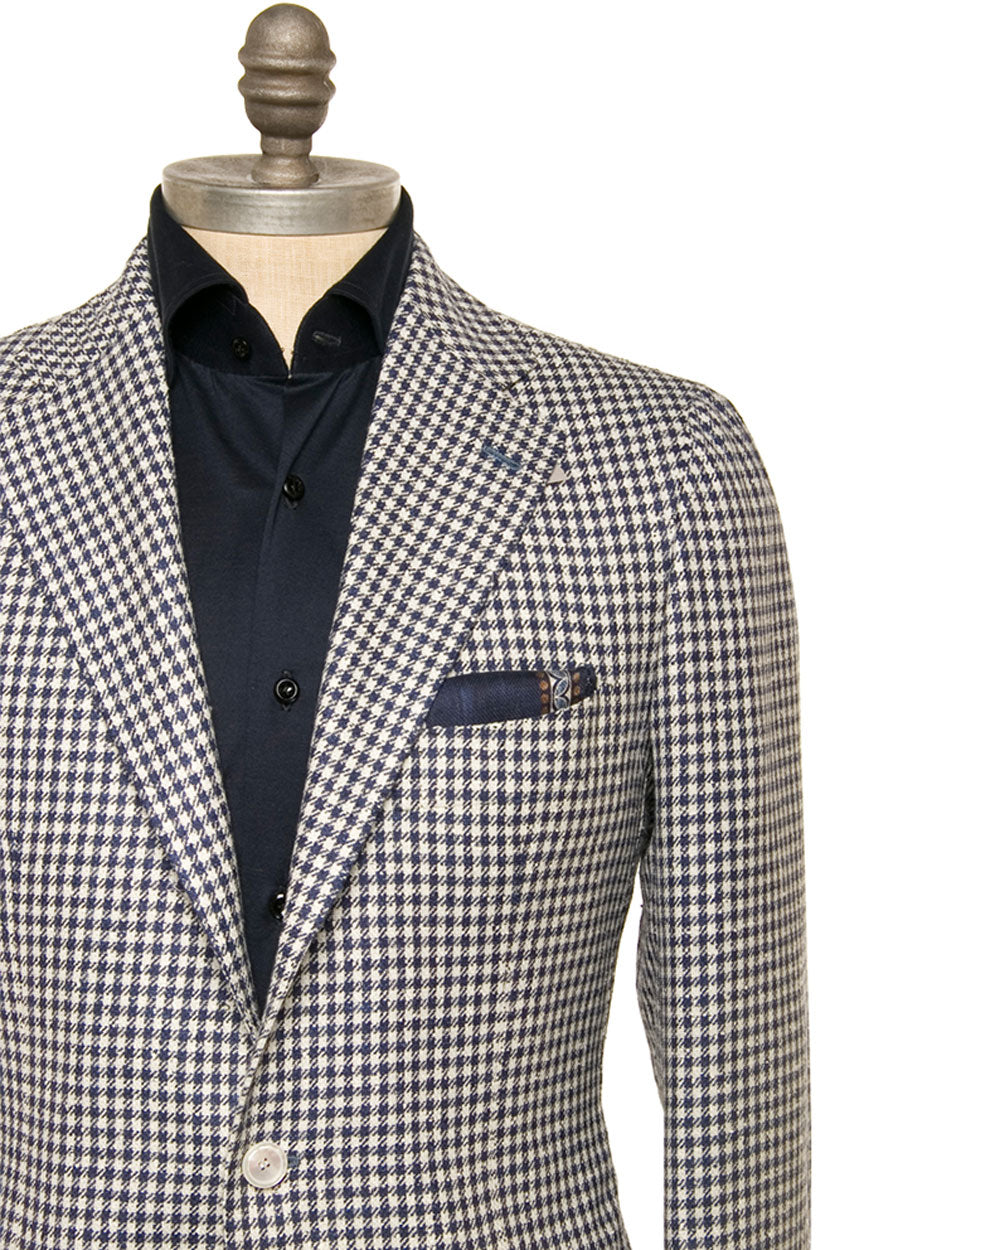 Navy and Ivory Houndstooth Sportcoat